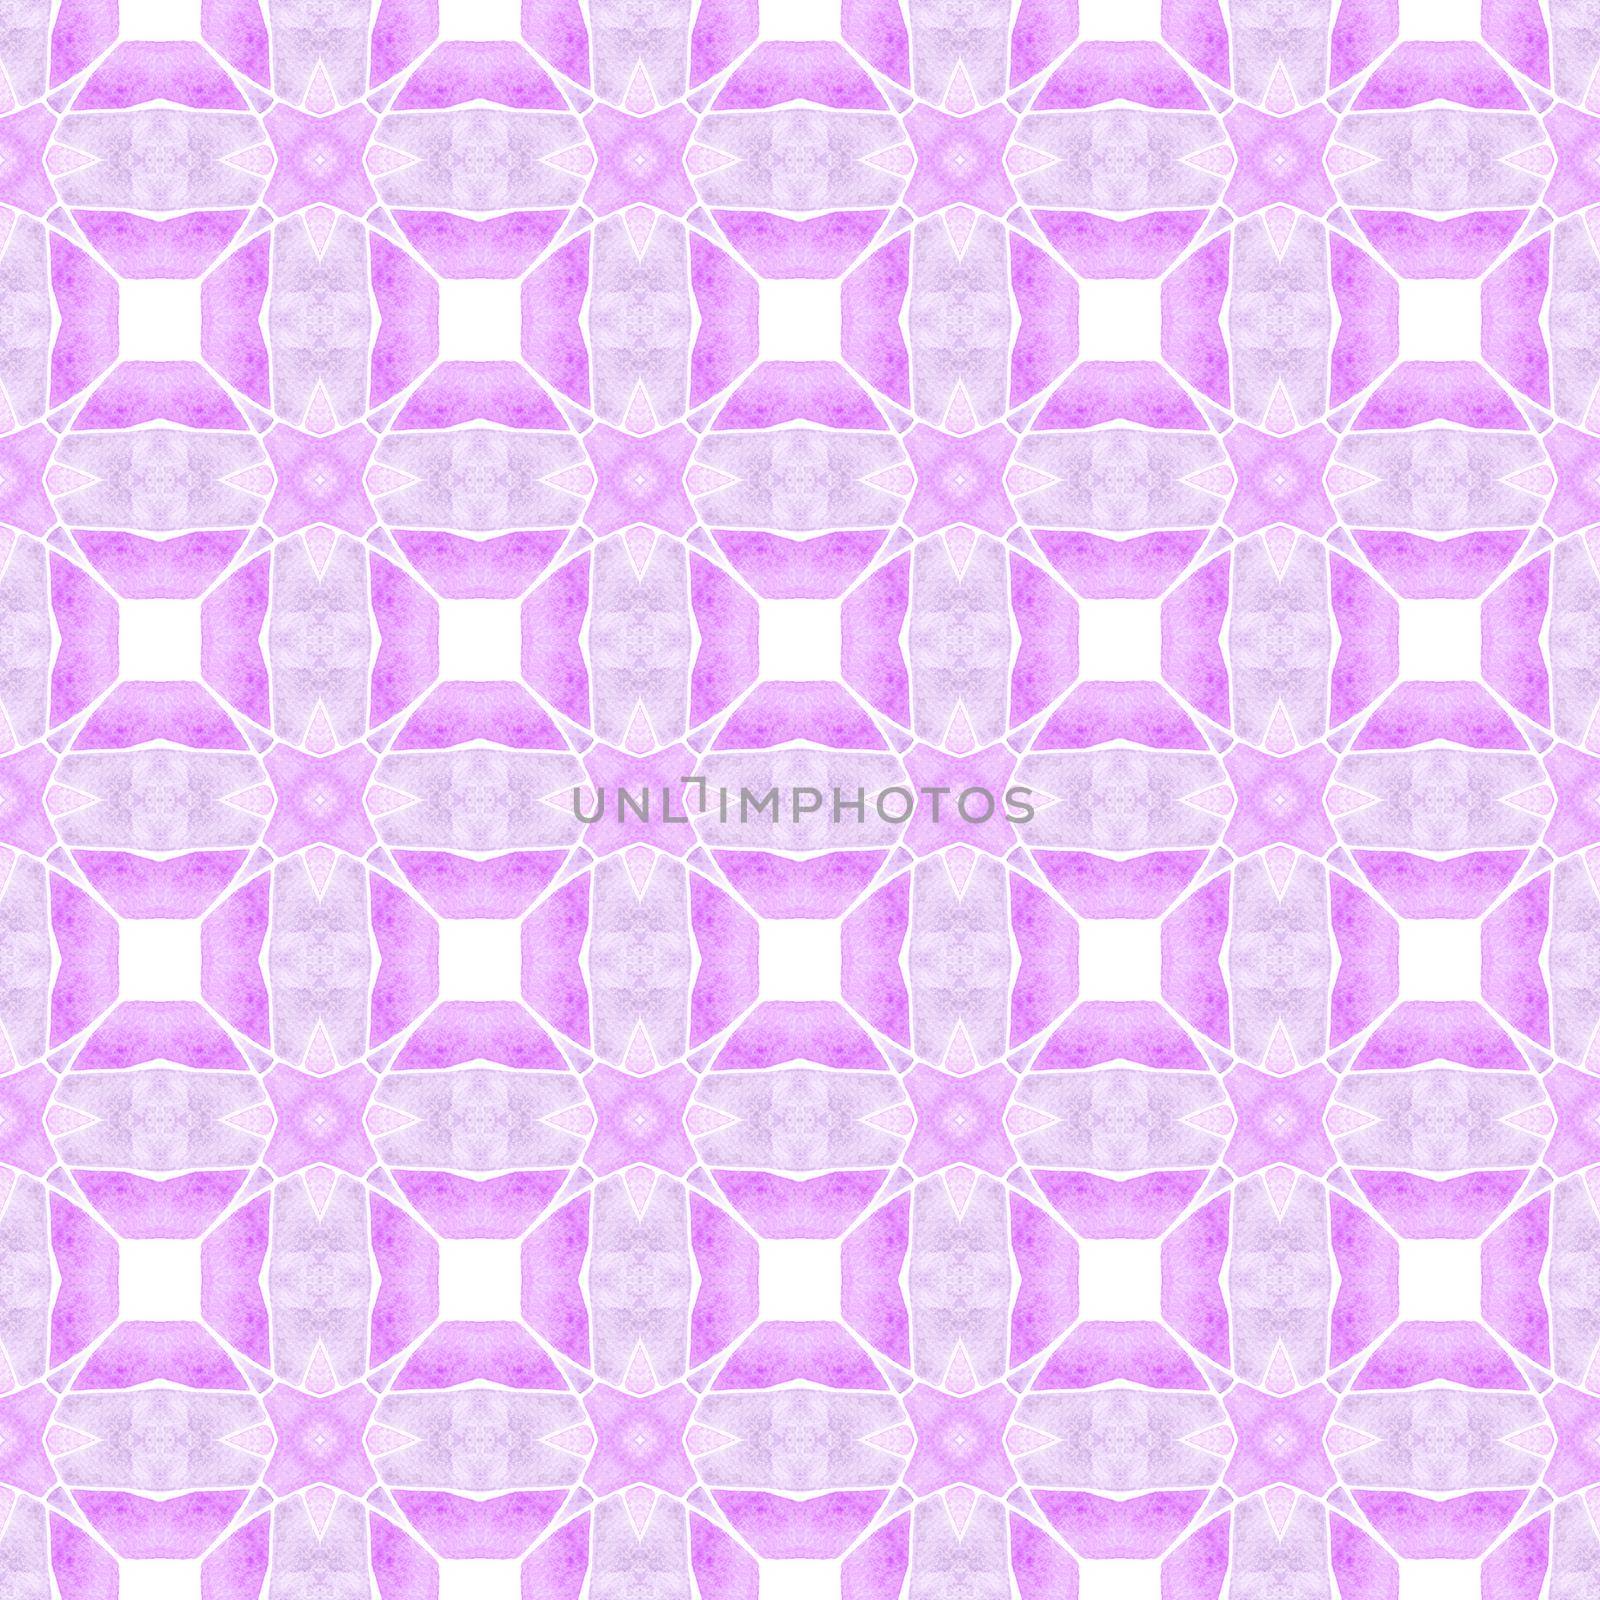 Textile ready alive print, swimwear fabric, wallpaper, wrapping. Purple posh boho chic summer design. Tiled watercolor background. Hand painted tiled watercolor border.